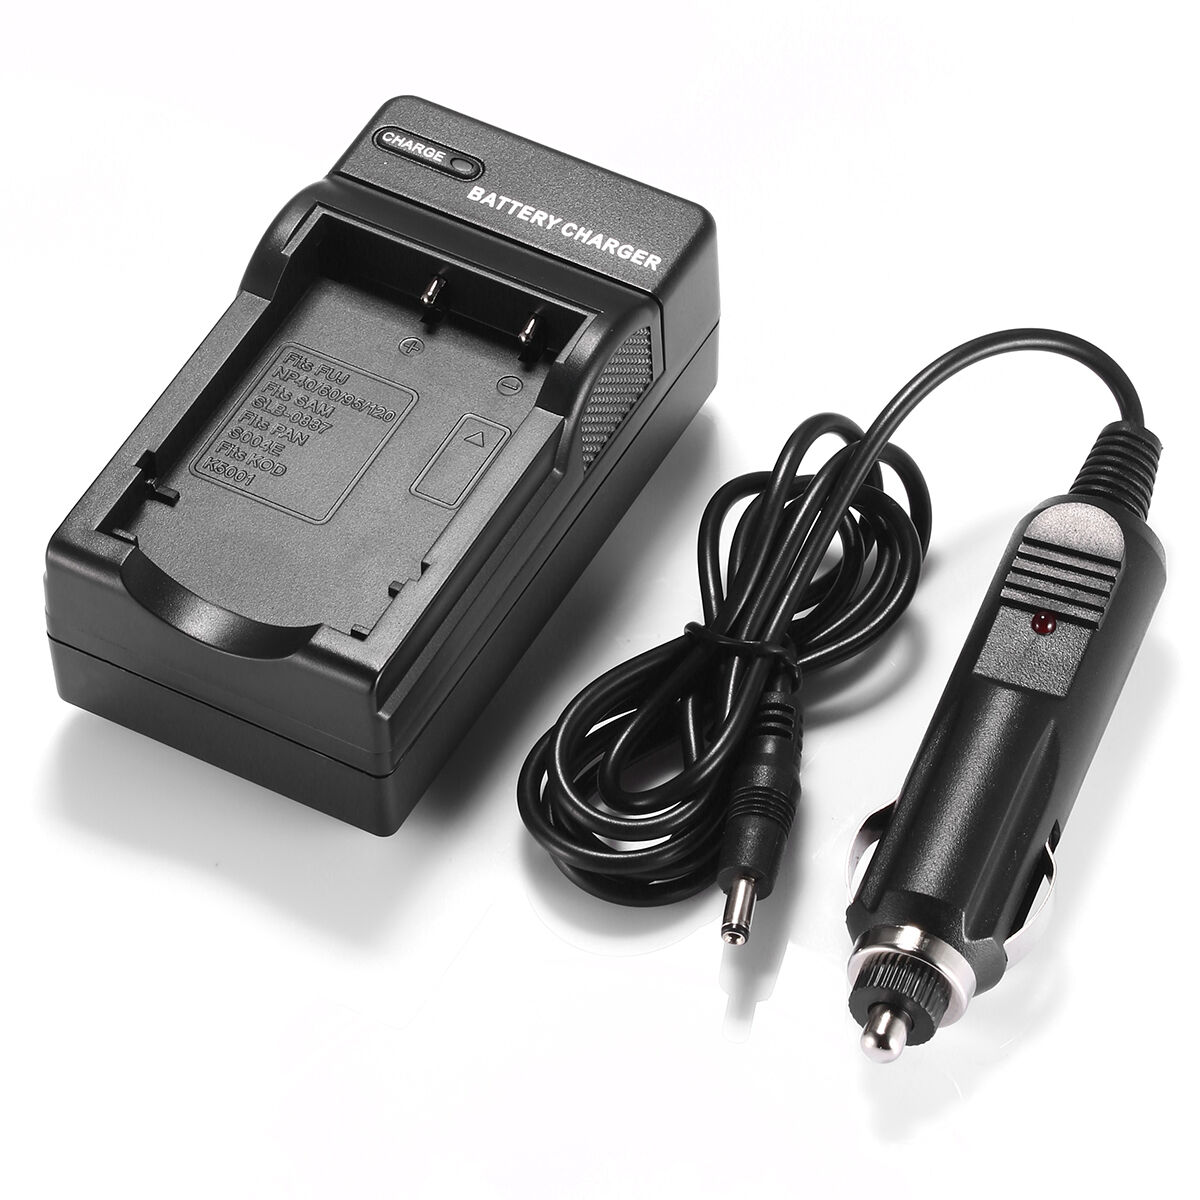 CASIO Exilim Zoom EX-Z250 battery charger